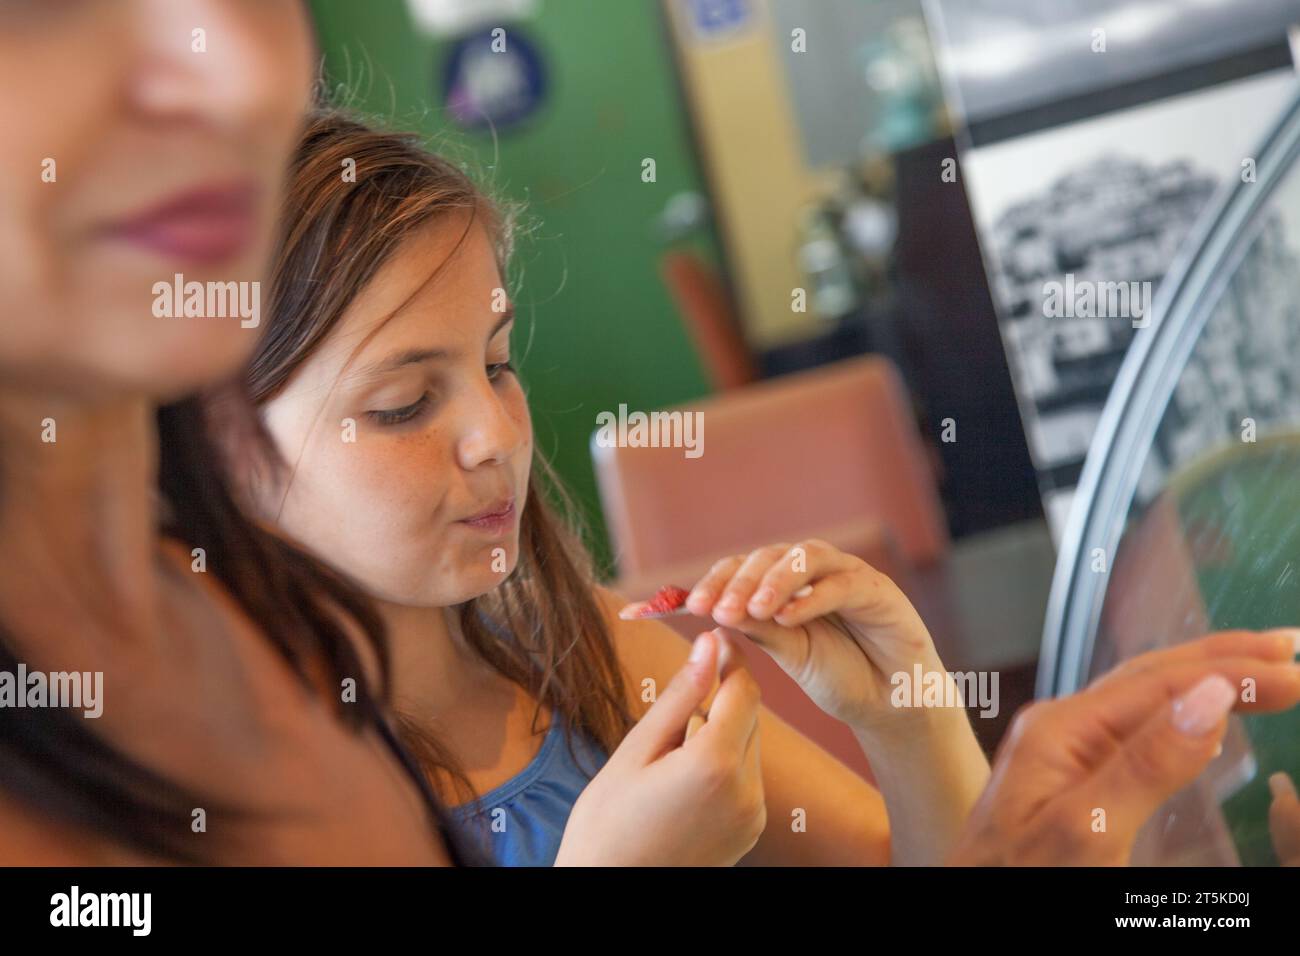 Cute Young Girl Sampling a Taste of Gelato with Her Mother at the Ice Cream Shop. Stock Photo